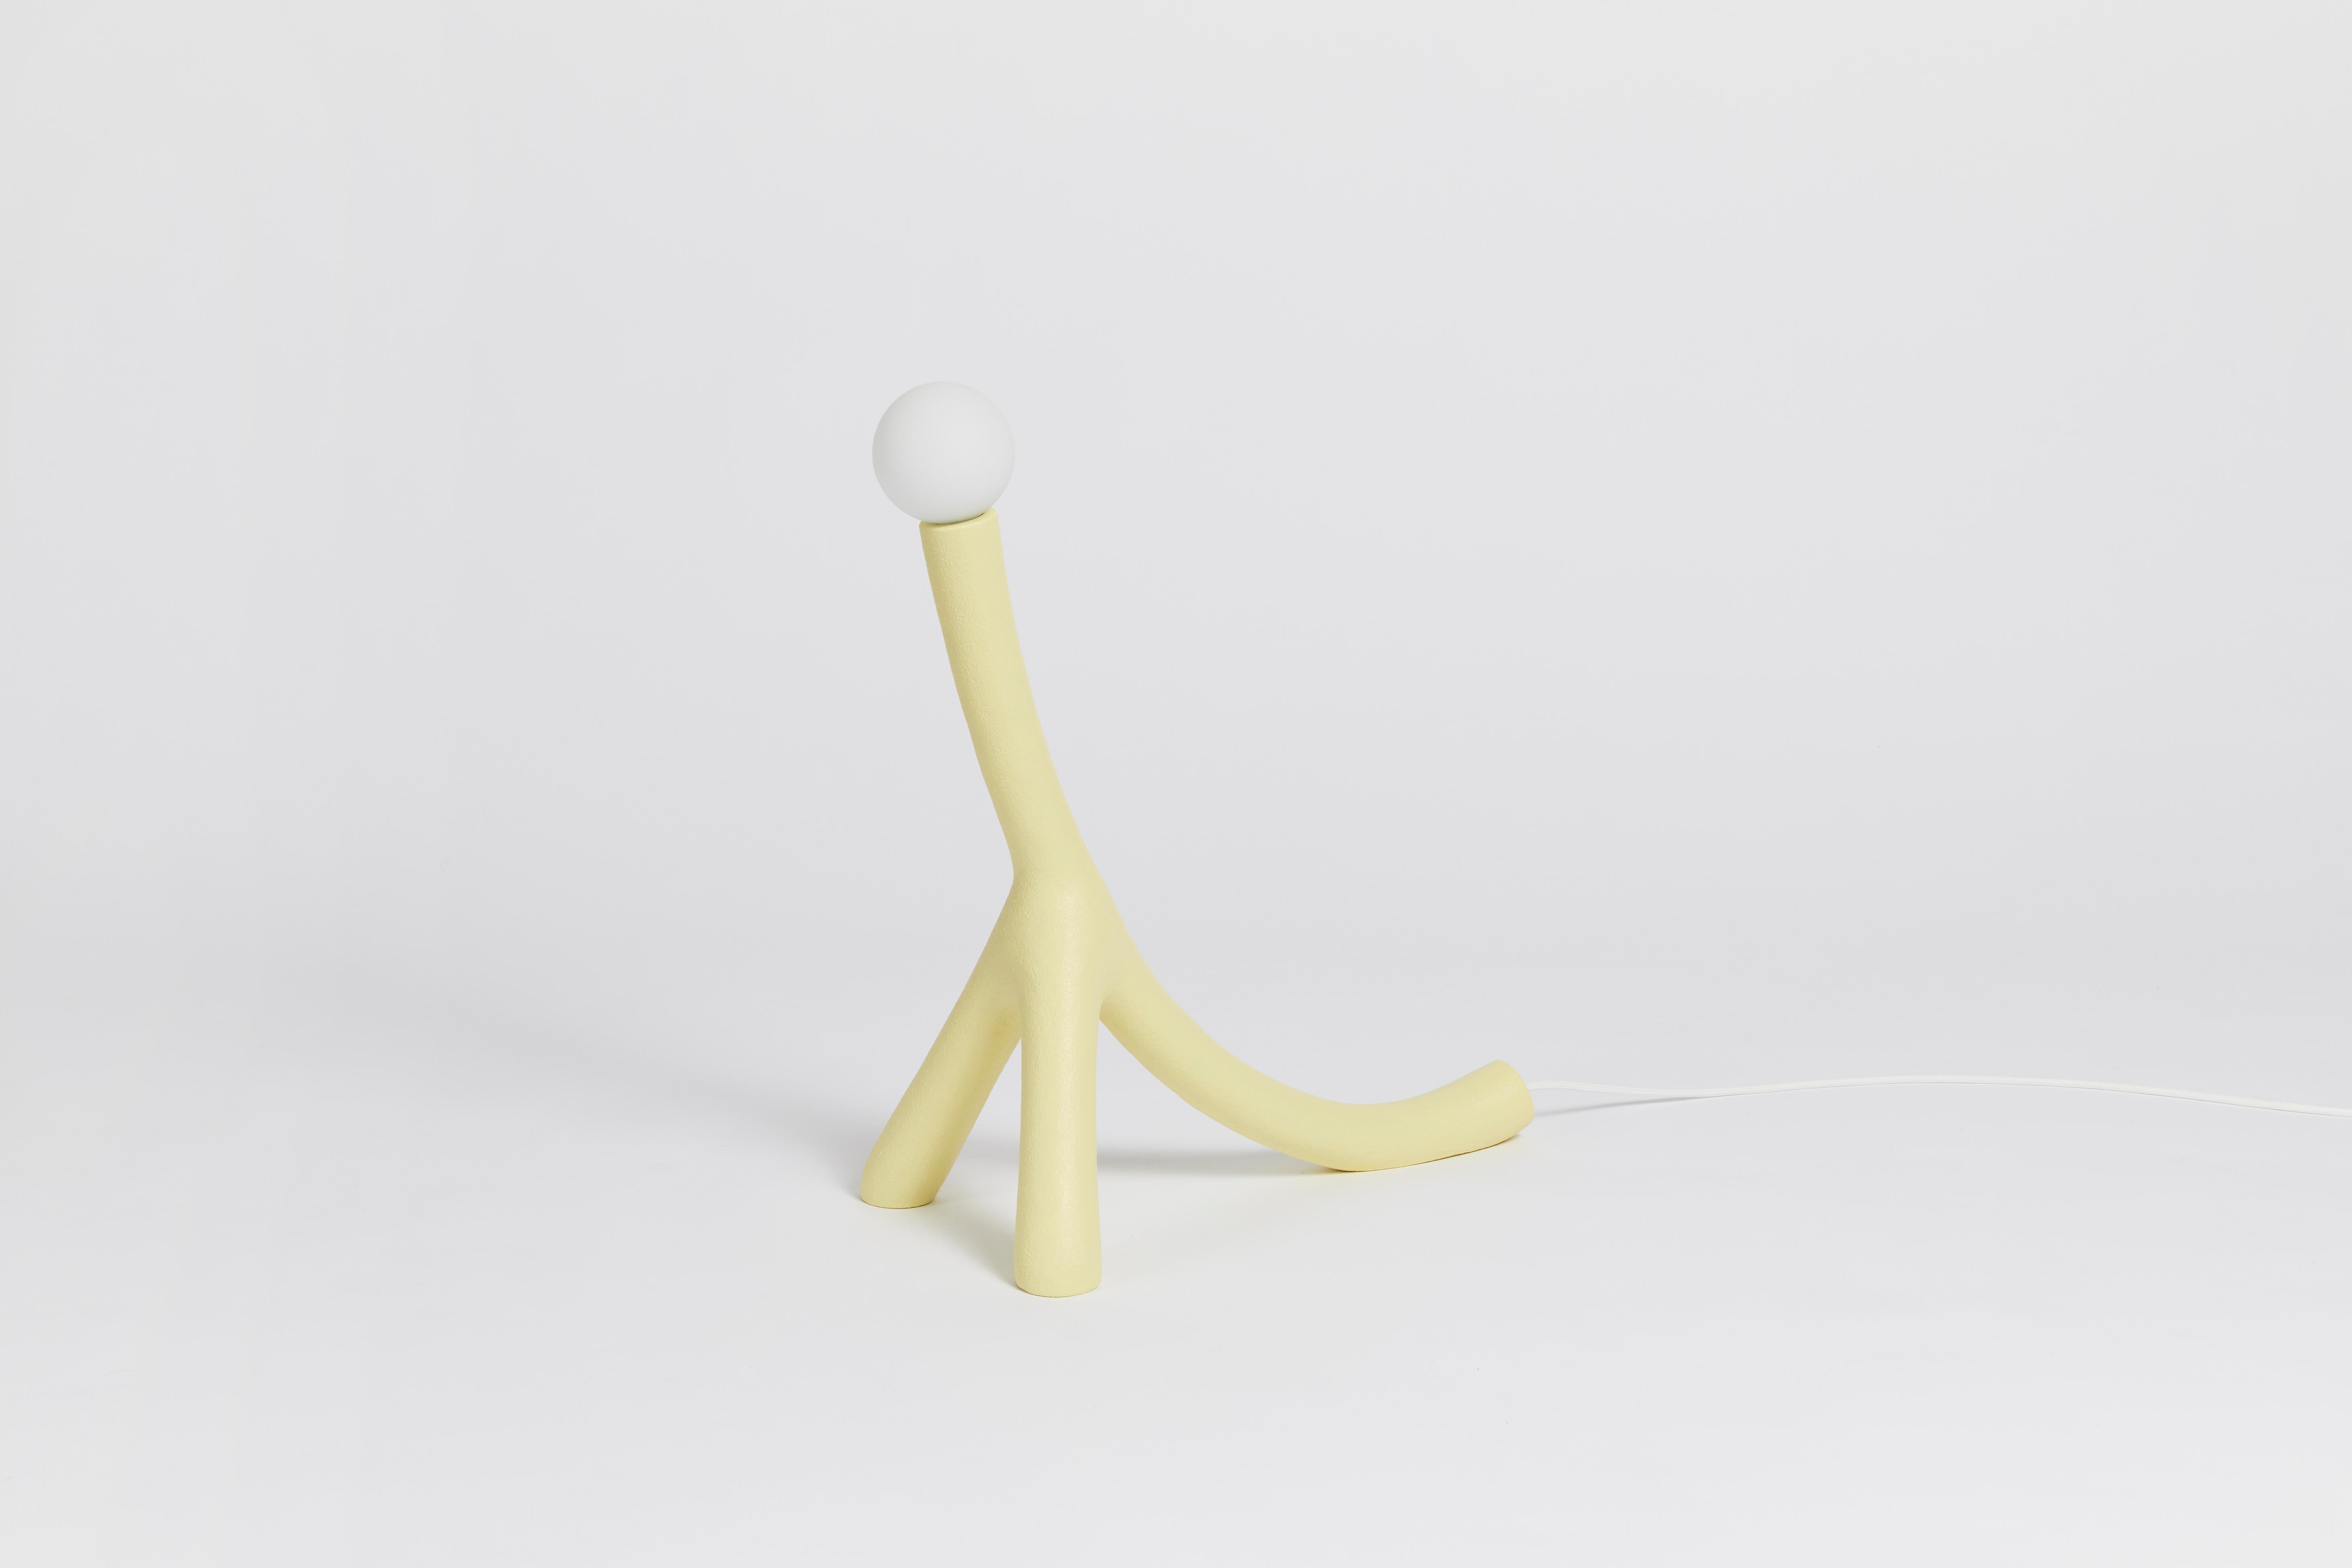 Play Object desk light 01 by HWE
Limited Edition
Materials: Waste SLS 3D nylon powder, Sand from sustainable sources
Dimensions: L 48 x W 27 x H 57 cm 
Colour: Anthracite, Aqua, Cream, Lemon, Pink and Grey
Finish: Matte, Sealed surface

All our